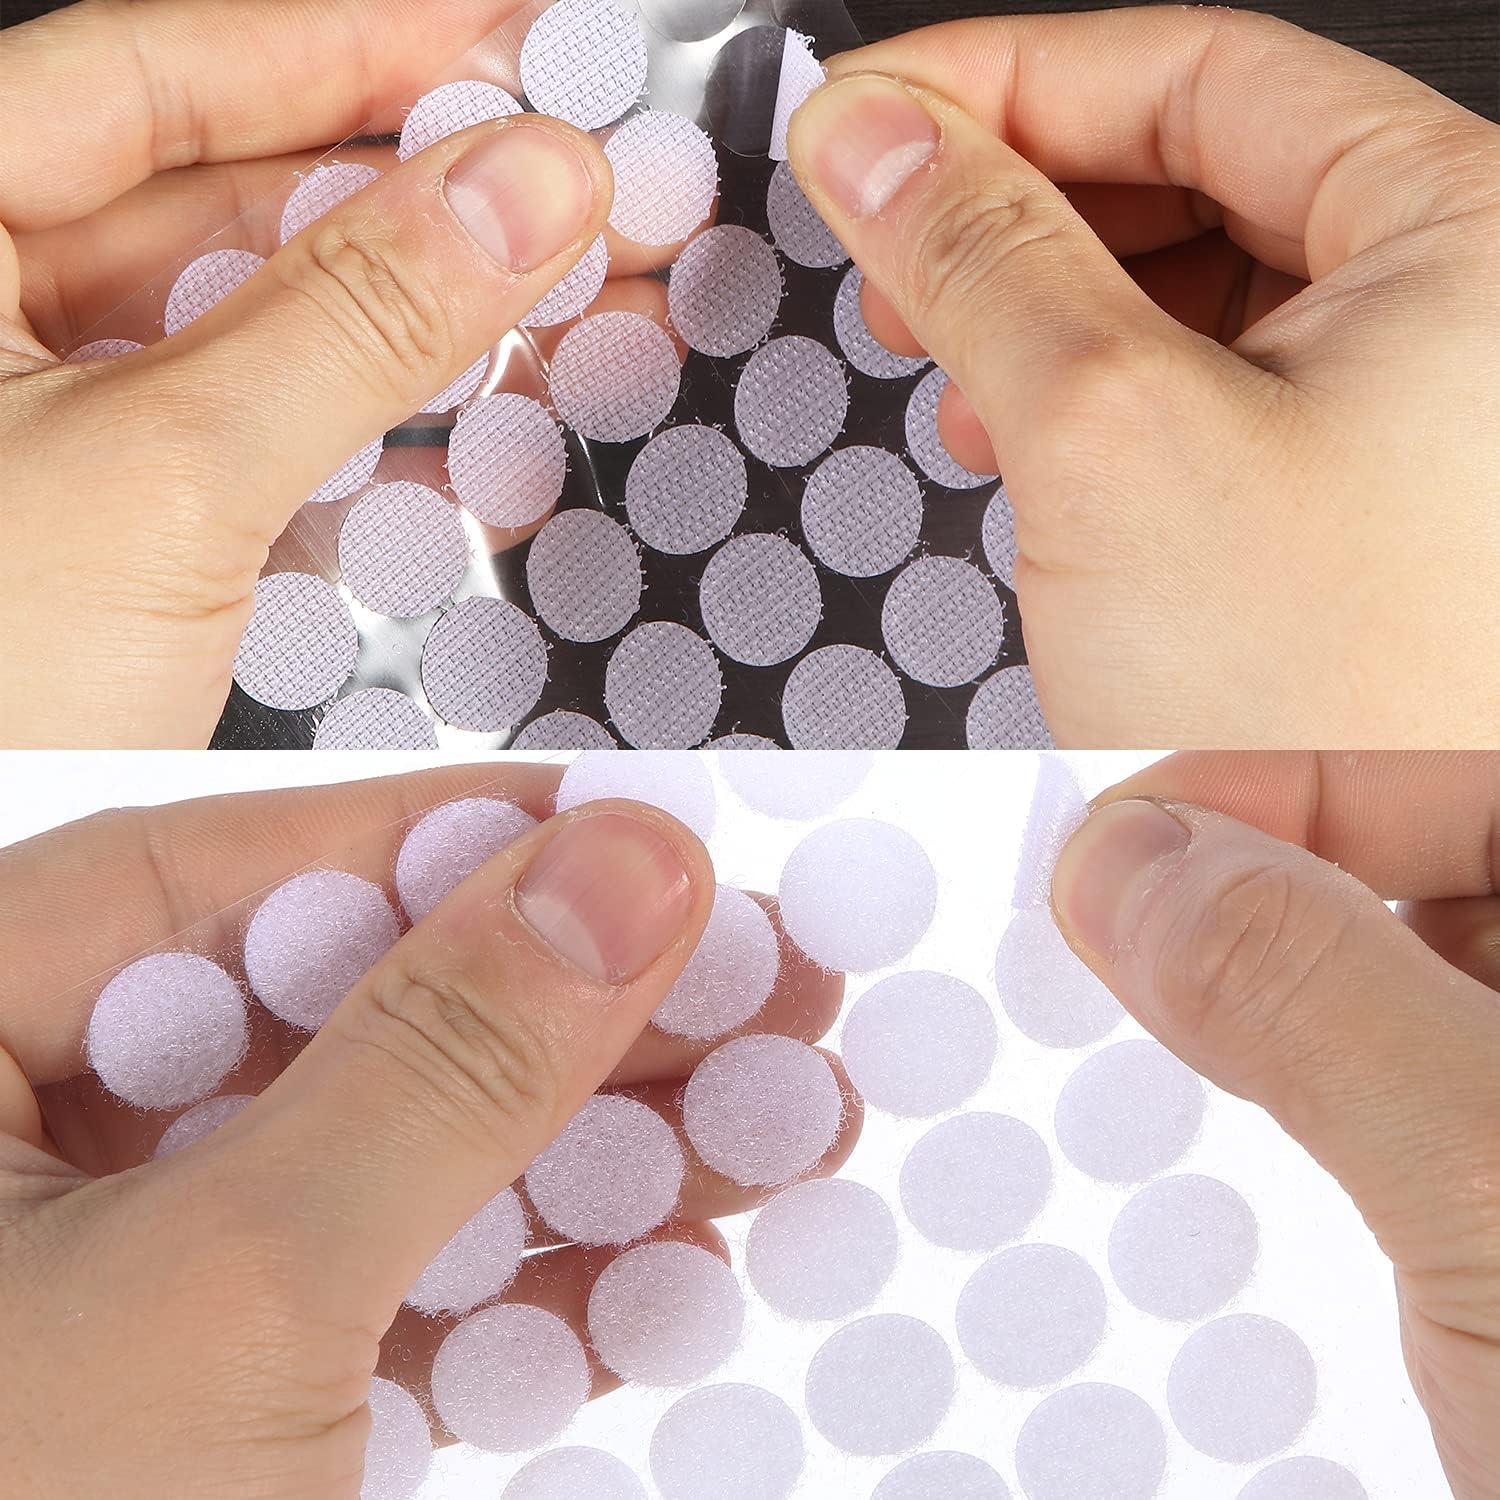 White Self Adhesive Dots 1000pcs(500 Pairs) 3/5 Diameter Hook and Loop Dots  Taps Perfect for School, Office